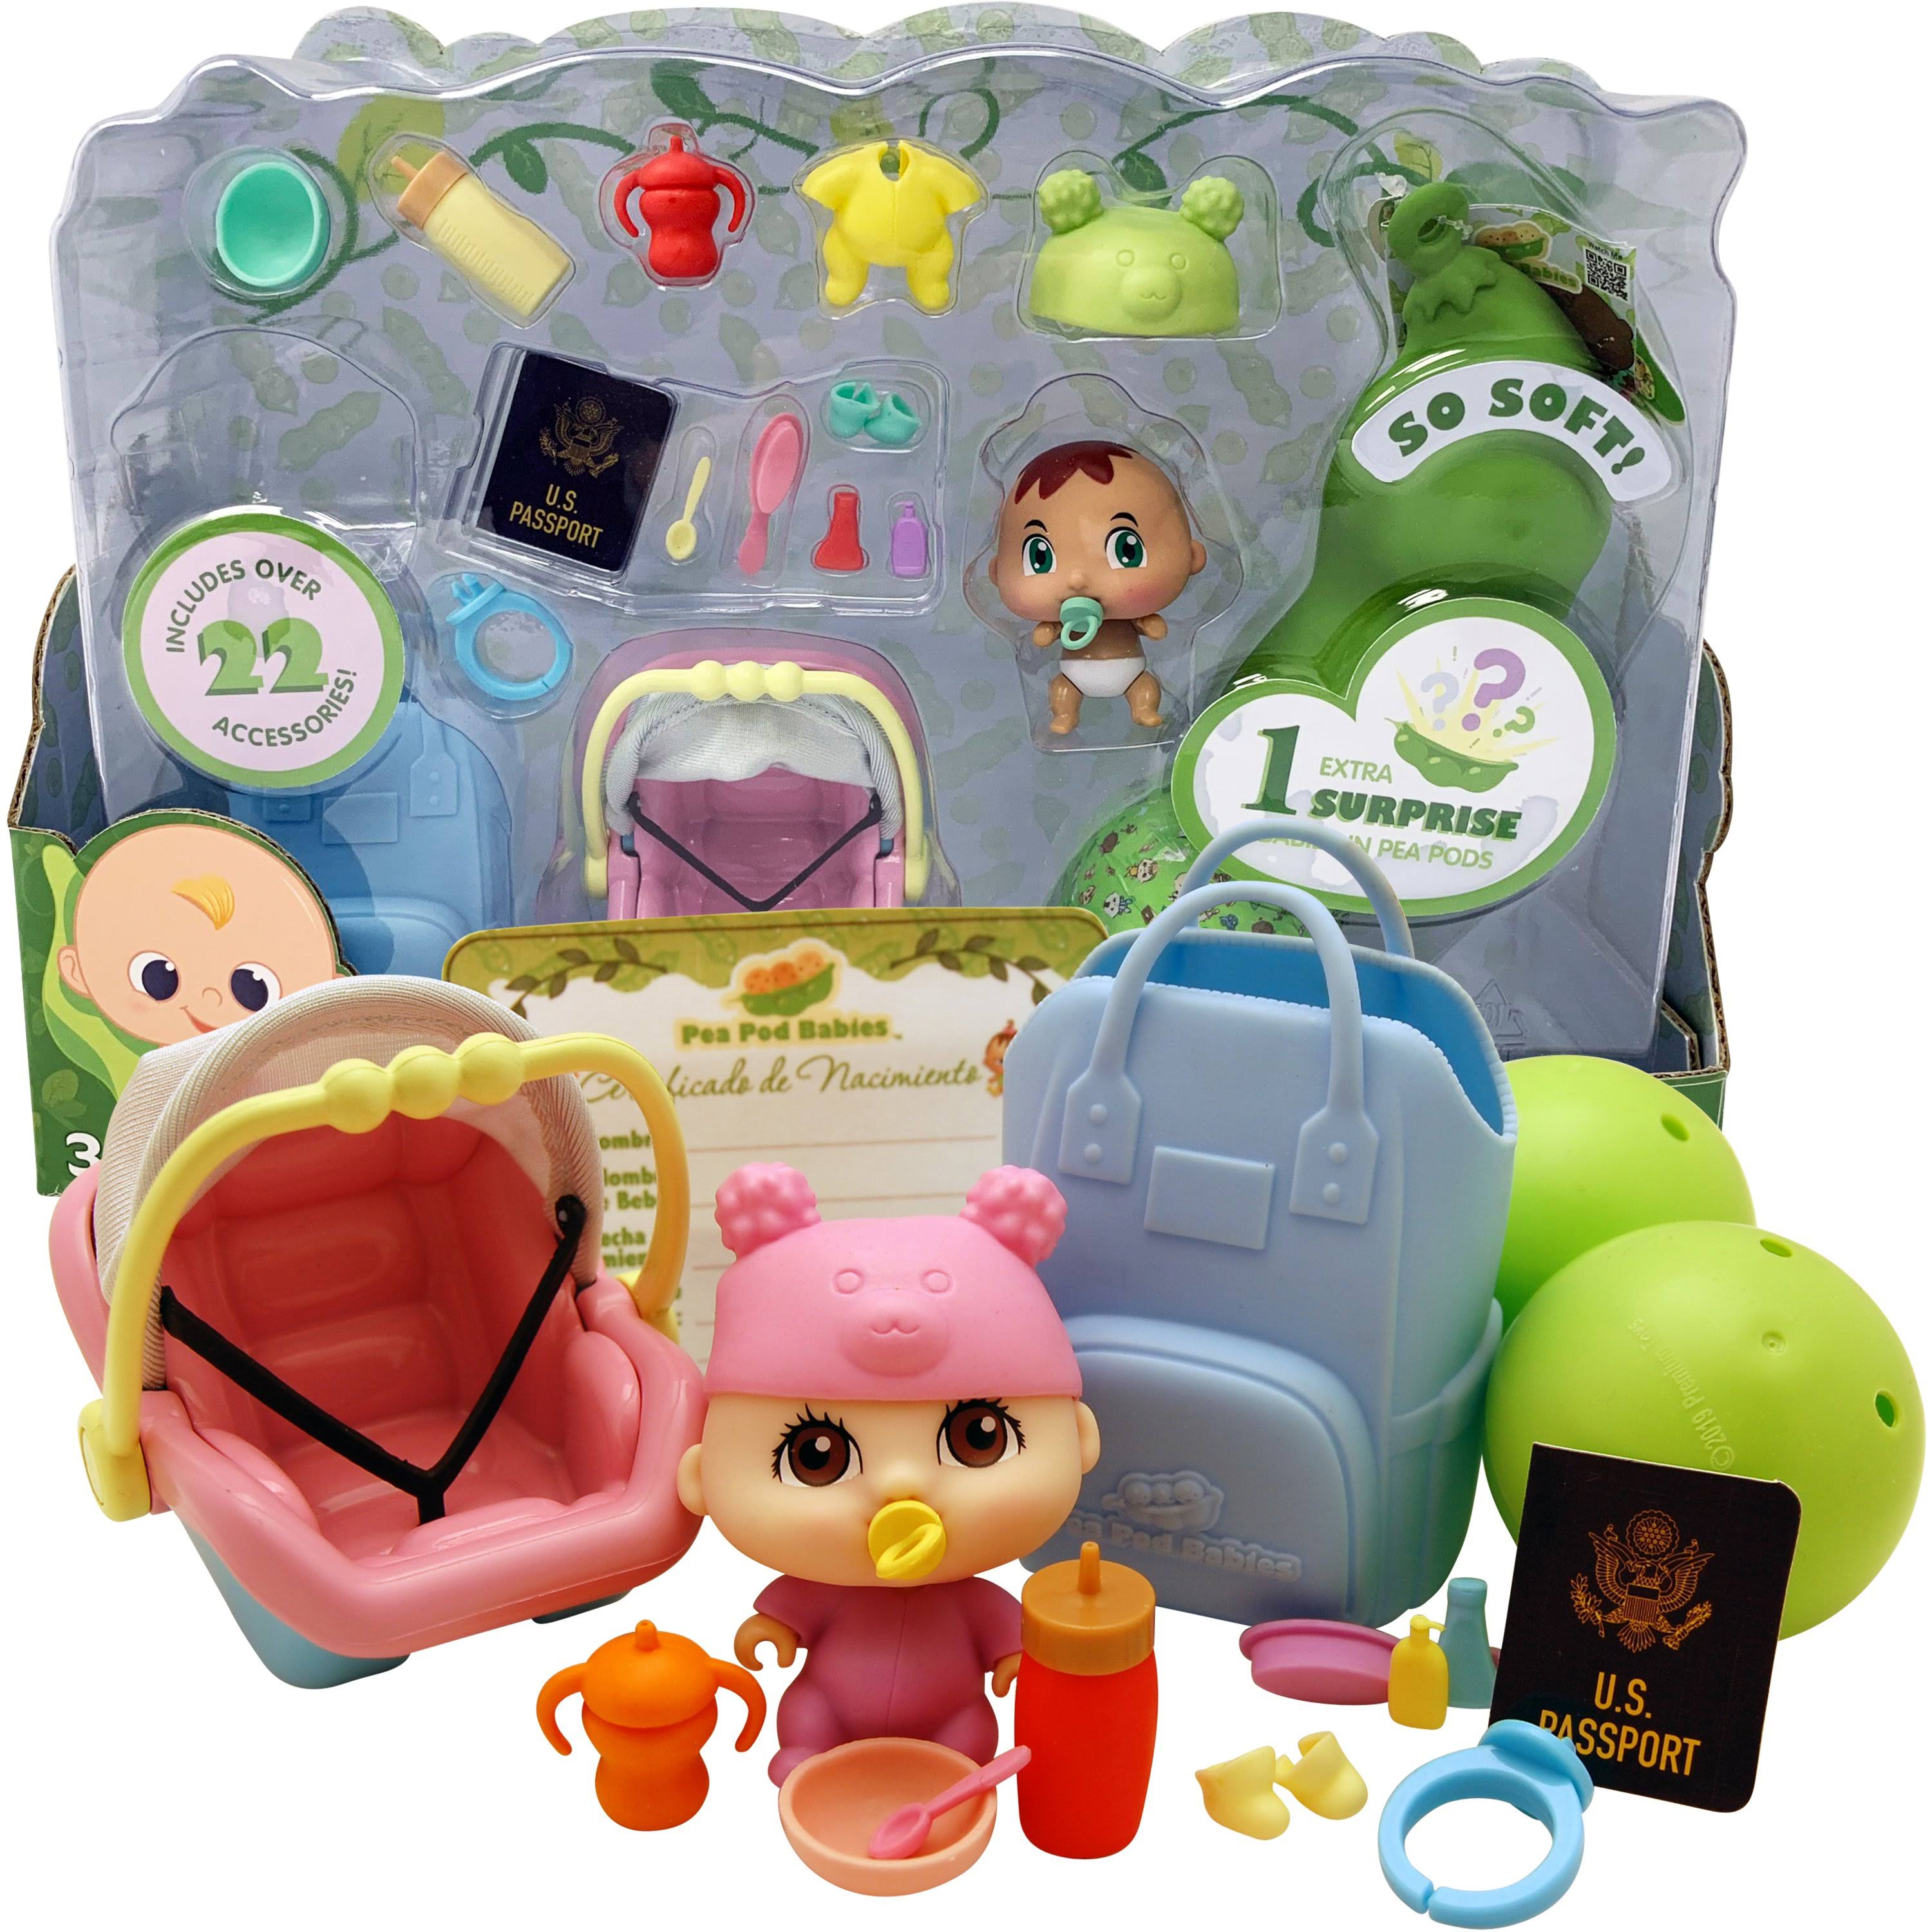 Pea Pod Babies Twenty Two Piece Little Traveler Playset - Collectible Mystery Surprise Toy with Mini Baby, Clothing, & Accessories - All in A Soft